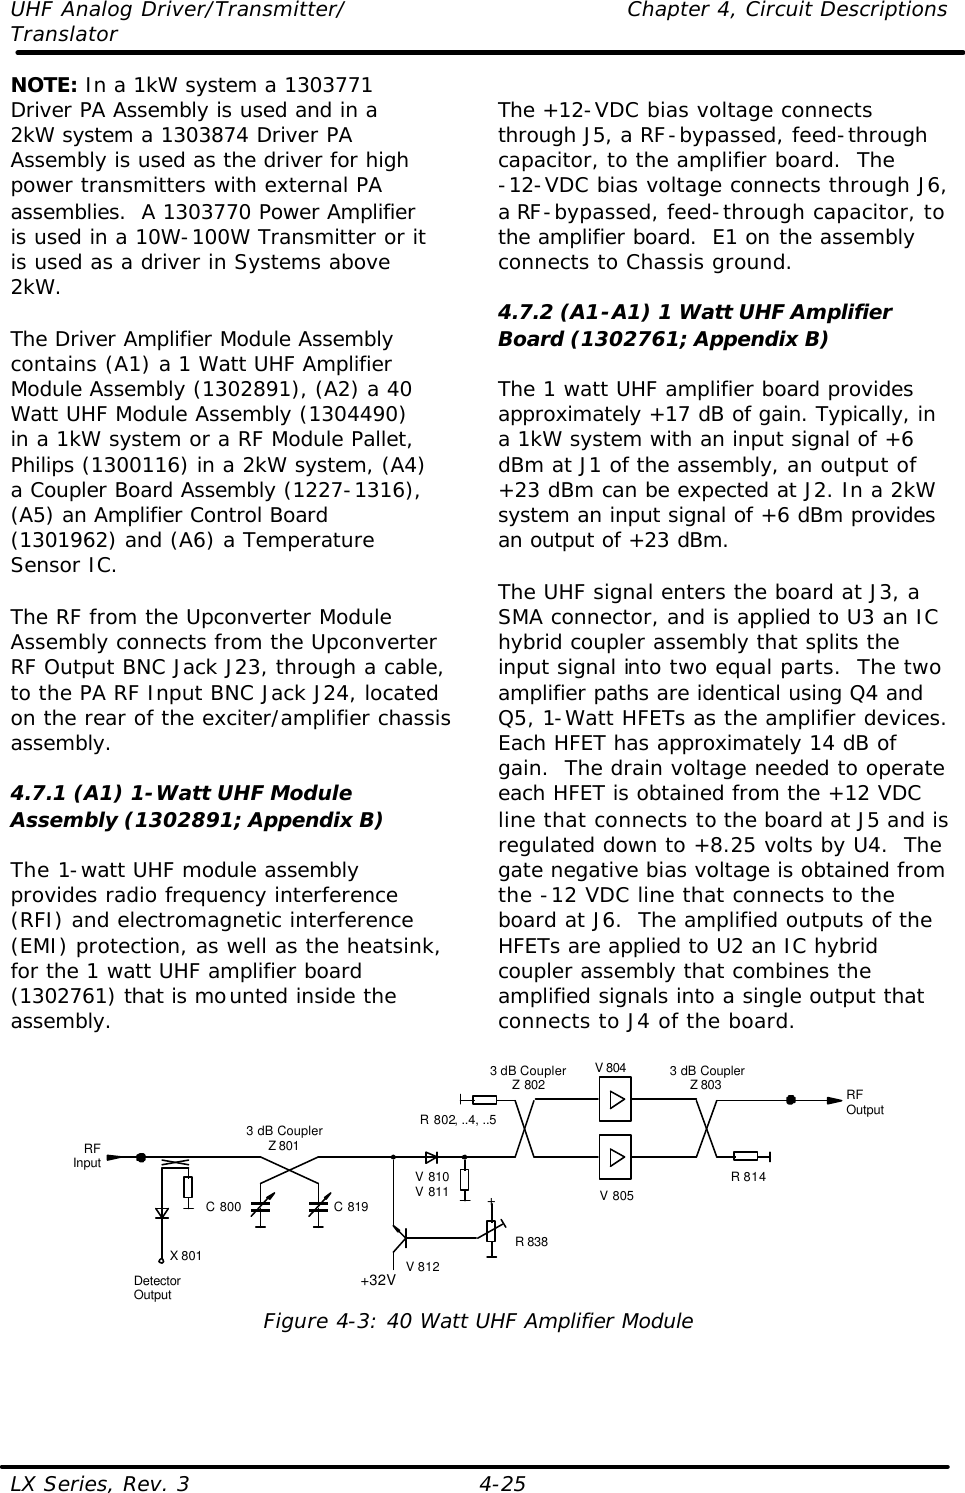 UHF Analog Driver/Transmitter/    Chapter 4, Circuit Descriptions Translator  LX Series, Rev. 3    4-25 NOTE: In a 1kW system a 1303771 Driver PA Assembly is used and in a 2kW system a 1303874 Driver PA Assembly is used as the driver for high power transmitters with external PA assemblies.  A 1303770 Power Amplifier is used in a 10W-100W Transmitter or it is used as a driver in Systems above 2kW.  The Driver Amplifier Module Assembly contains (A1) a 1 Watt UHF Amplifier Module Assembly (1302891), (A2) a 40 Watt UHF Module Assembly (1304490) in a 1kW system or a RF Module Pallet, Philips (1300116) in a 2kW system, (A4) a Coupler Board Assembly (1227-1316), (A5) an Amplifier Control Board (1301962) and (A6) a Temperature Sensor IC.  The RF from the Upconverter Module Assembly connects from the Upconverter RF Output BNC Jack J23, through a cable, to the PA RF Input BNC Jack J24, located on the rear of the exciter/amplifier chassis assembly.  4.7.1 (A1) 1-Watt UHF Module Assembly (1302891; Appendix B)  The 1-watt UHF module assembly provides radio frequency interference (RFI) and electromagnetic interference (EMI) protection, as well as the heatsink, for the 1 watt UHF amplifier board (1302761) that is mounted inside the assembly.   The +12-VDC bias voltage connects through J5, a RF-bypassed, feed-through capacitor, to the amplifier board.  The  -12-VDC bias voltage connects through J6, a RF-bypassed, feed-through capacitor, to the amplifier board.  E1 on the assembly connects to Chassis ground.  4.7.2 (A1-A1) 1 Watt UHF Amplifier Board (1302761; Appendix B)  The 1 watt UHF amplifier board provides approximately +17 dB of gain. Typically, in a 1kW system with an input signal of +6 dBm at J1 of the assembly, an output of +23 dBm can be expected at J2. In a 2kW system an input signal of +6 dBm provides an output of +23 dBm.  The UHF signal enters the board at J3, a SMA connector, and is applied to U3 an IC hybrid coupler assembly that splits the input signal into two equal parts.  The two amplifier paths are identical using Q4 and Q5, 1-Watt HFETs as the amplifier devices.  Each HFET has approximately 14 dB of gain.  The drain voltage needed to operate each HFET is obtained from the +12 VDC line that connects to the board at J5 and is regulated down to +8.25 volts by U4.  The gate negative bias voltage is obtained from the -12 VDC line that connects to the board at J6.  The amplified outputs of the HFETs are applied to U2 an IC hybrid coupler assembly that combines the amplified signals into a single output that connects to J4 of the board.  V 805V 8043 dB CouplerZ 801RFOutputRFInput R 814R 802, ..4, ..5C 800 C 819DetectorOutputX 801+32V+R 838V 810V 811V 8123 dB CouplerZ 802 3 dB CouplerZ 803 Figure 4-3: 40 Watt UHF Amplifier Module   